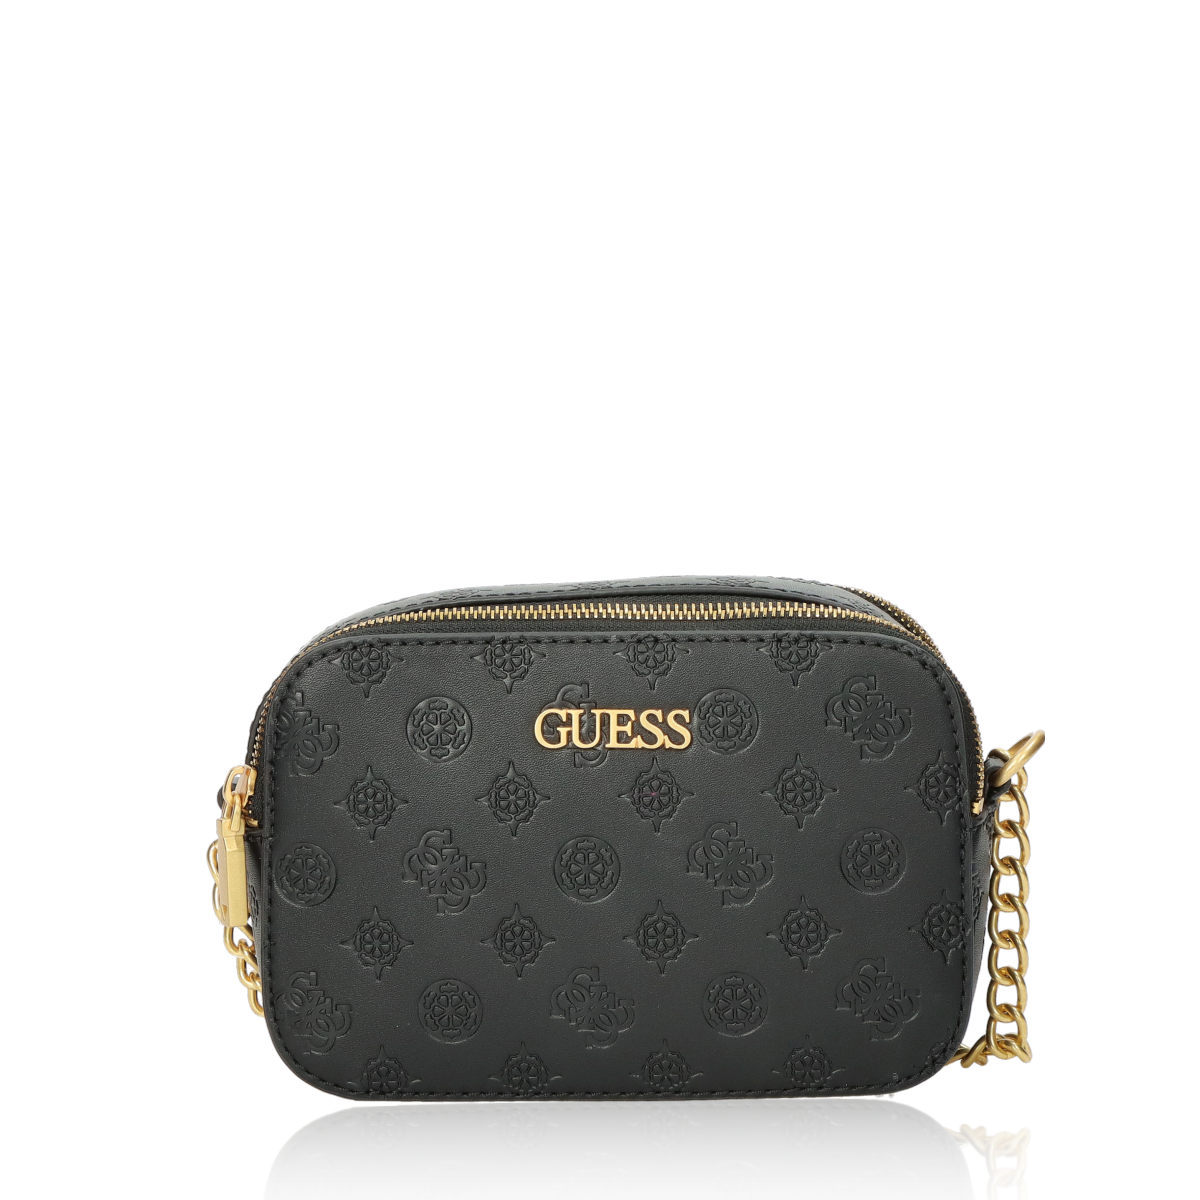 Guess women's all-year-round bag - black